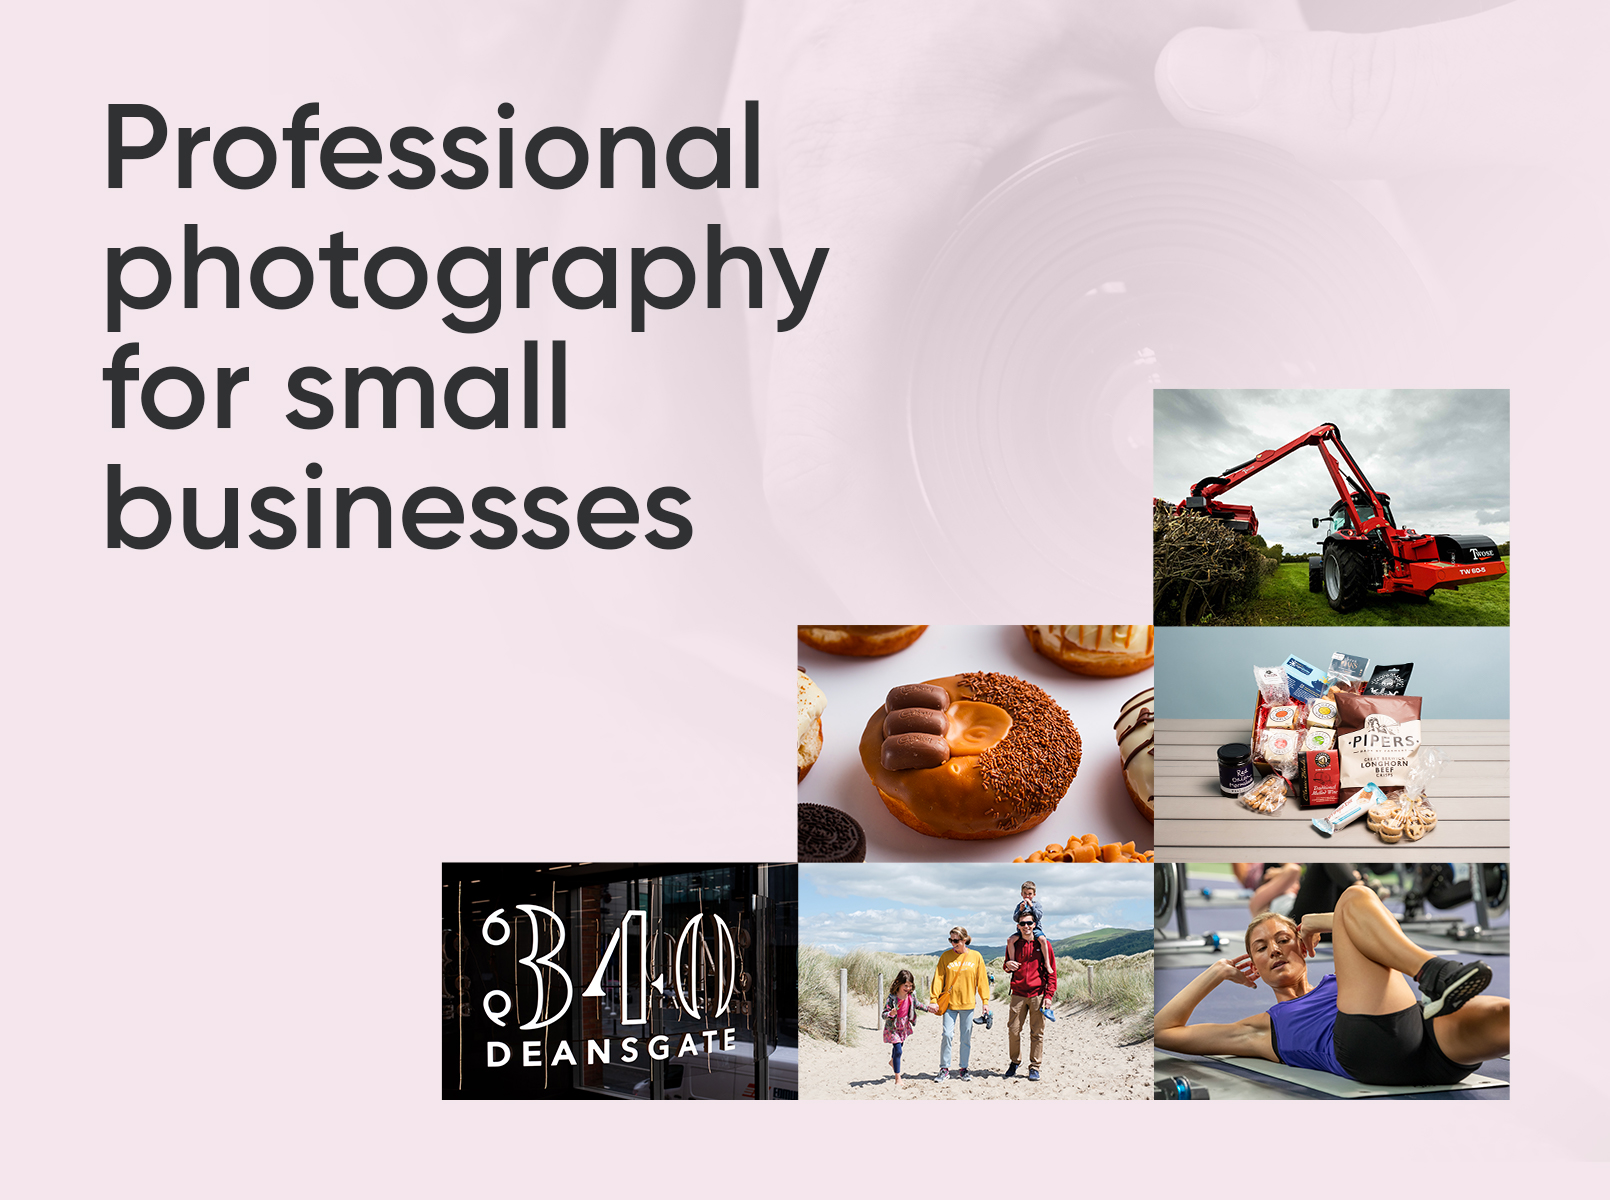 6 reasons to hire a Professional Photography Service for your small business